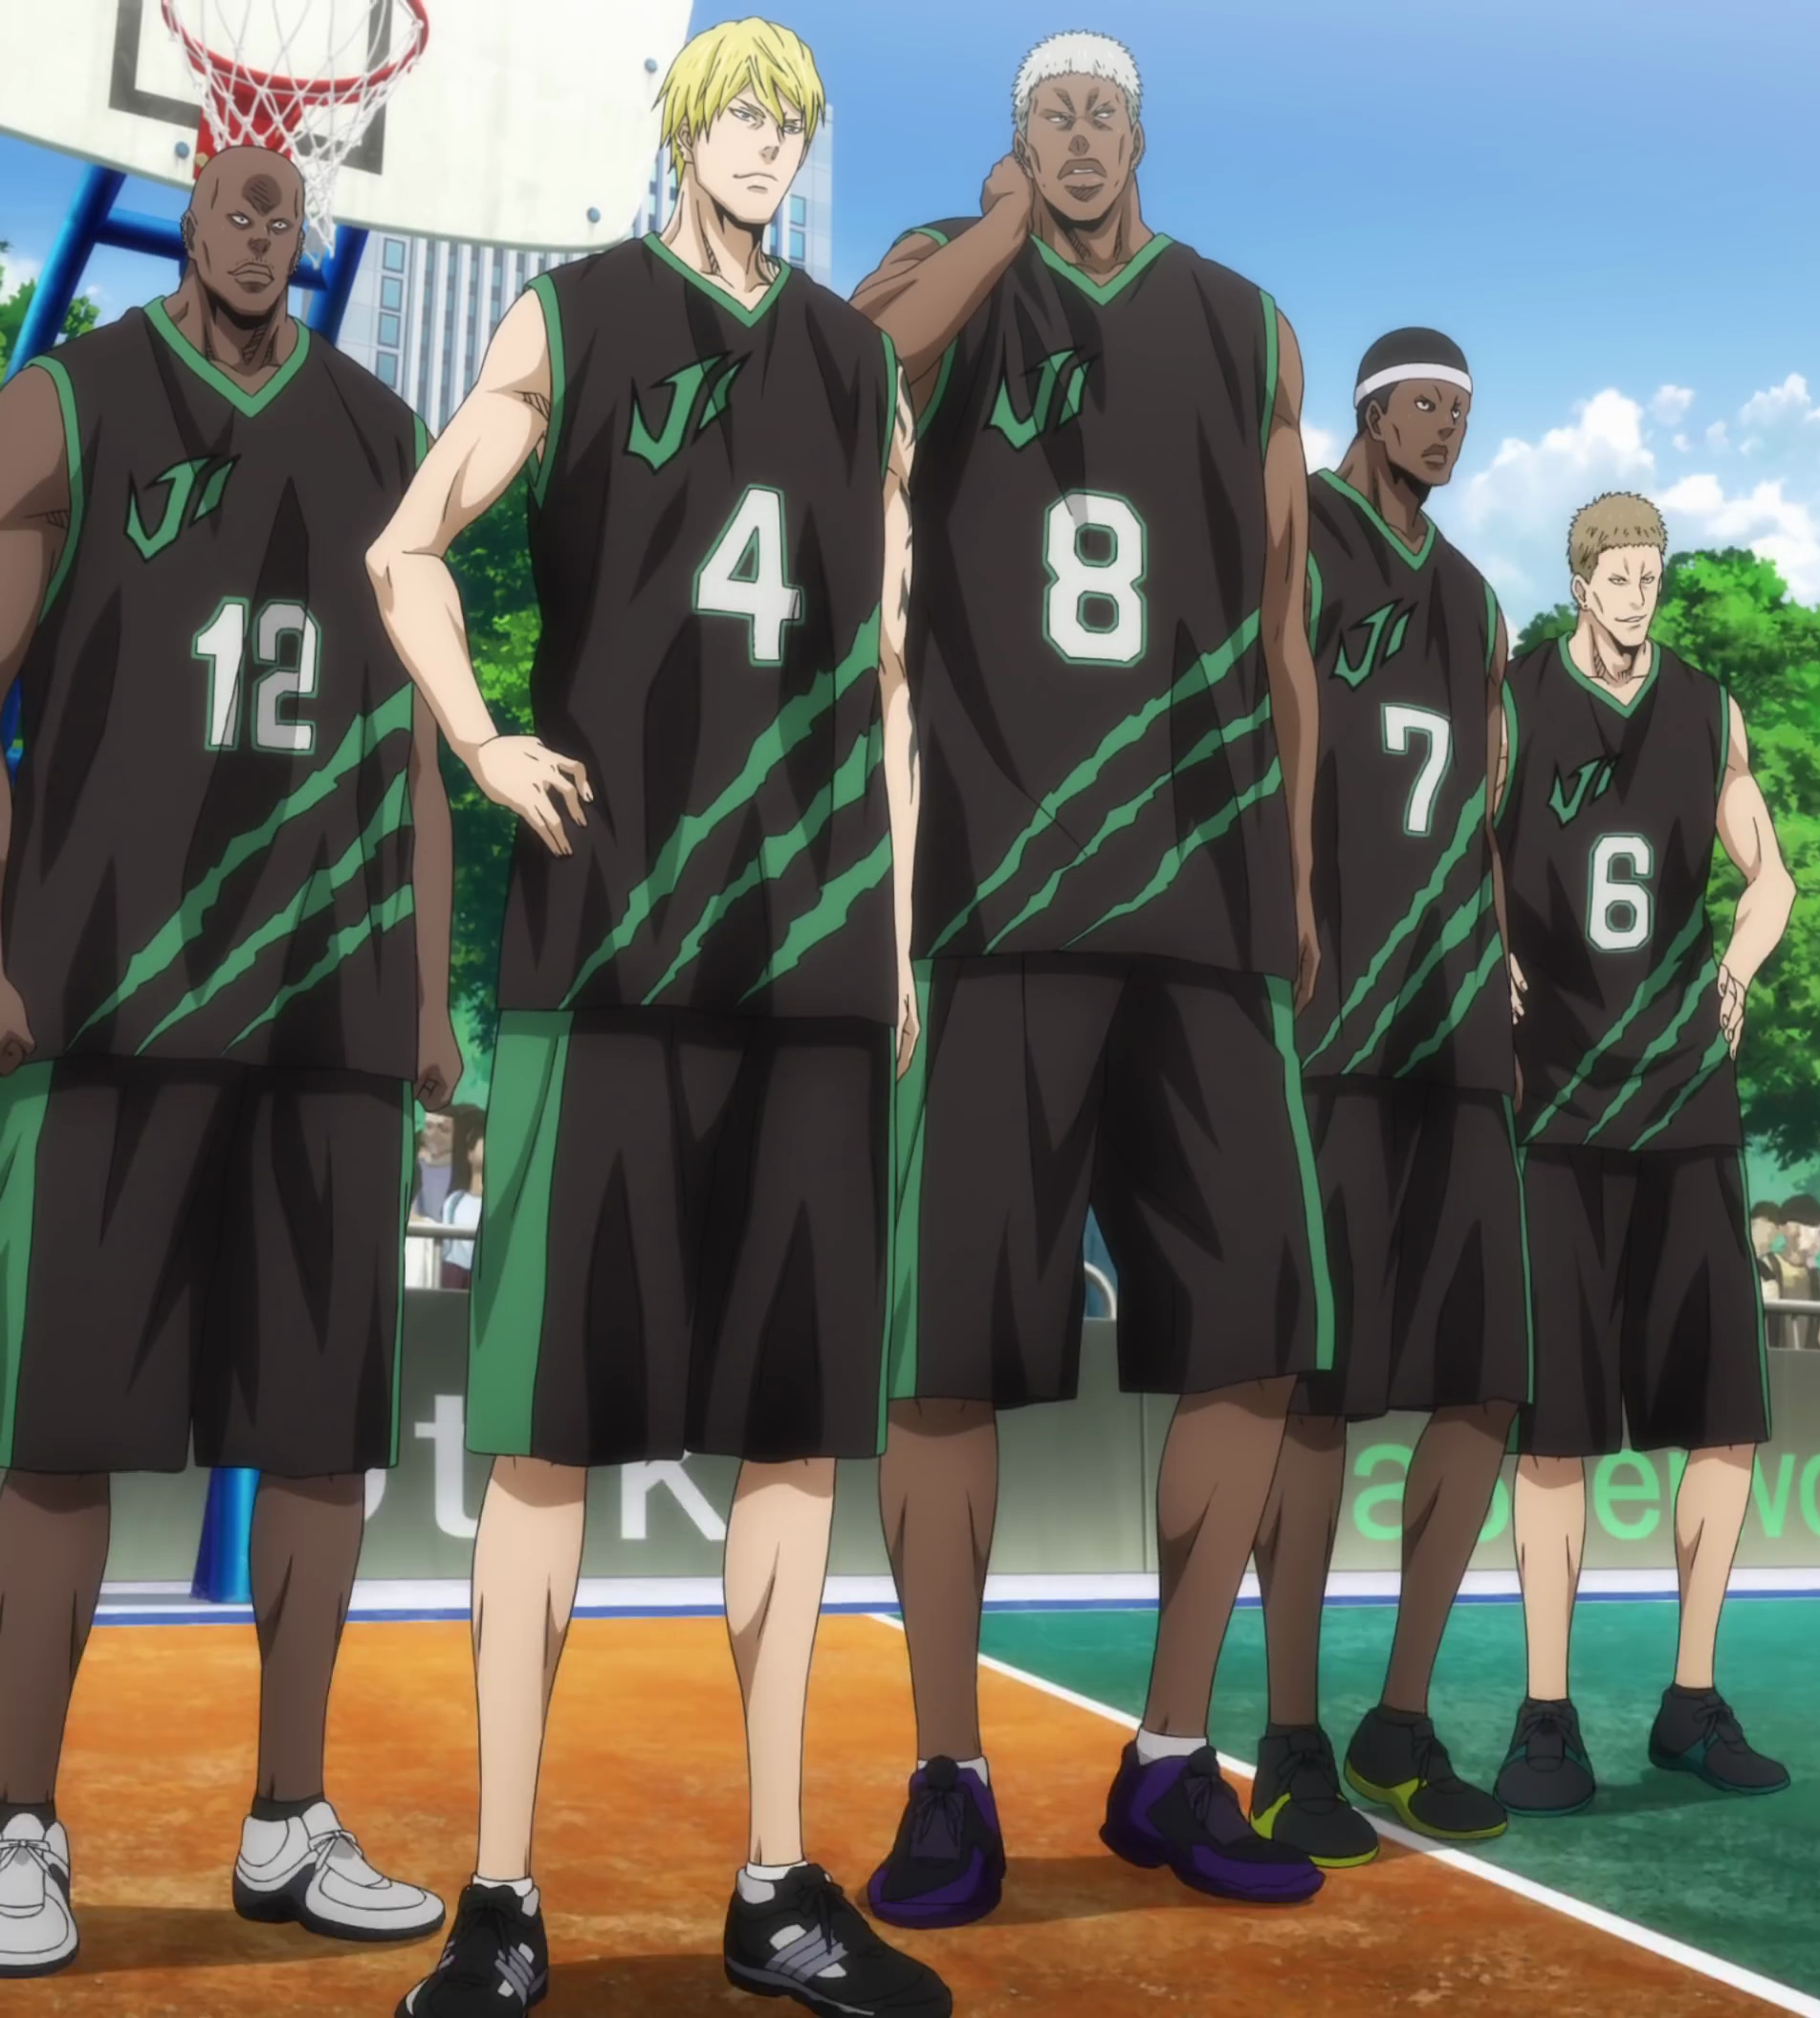 Past KNB react to the future ft. Kagami (contains spoilers about the movie)  